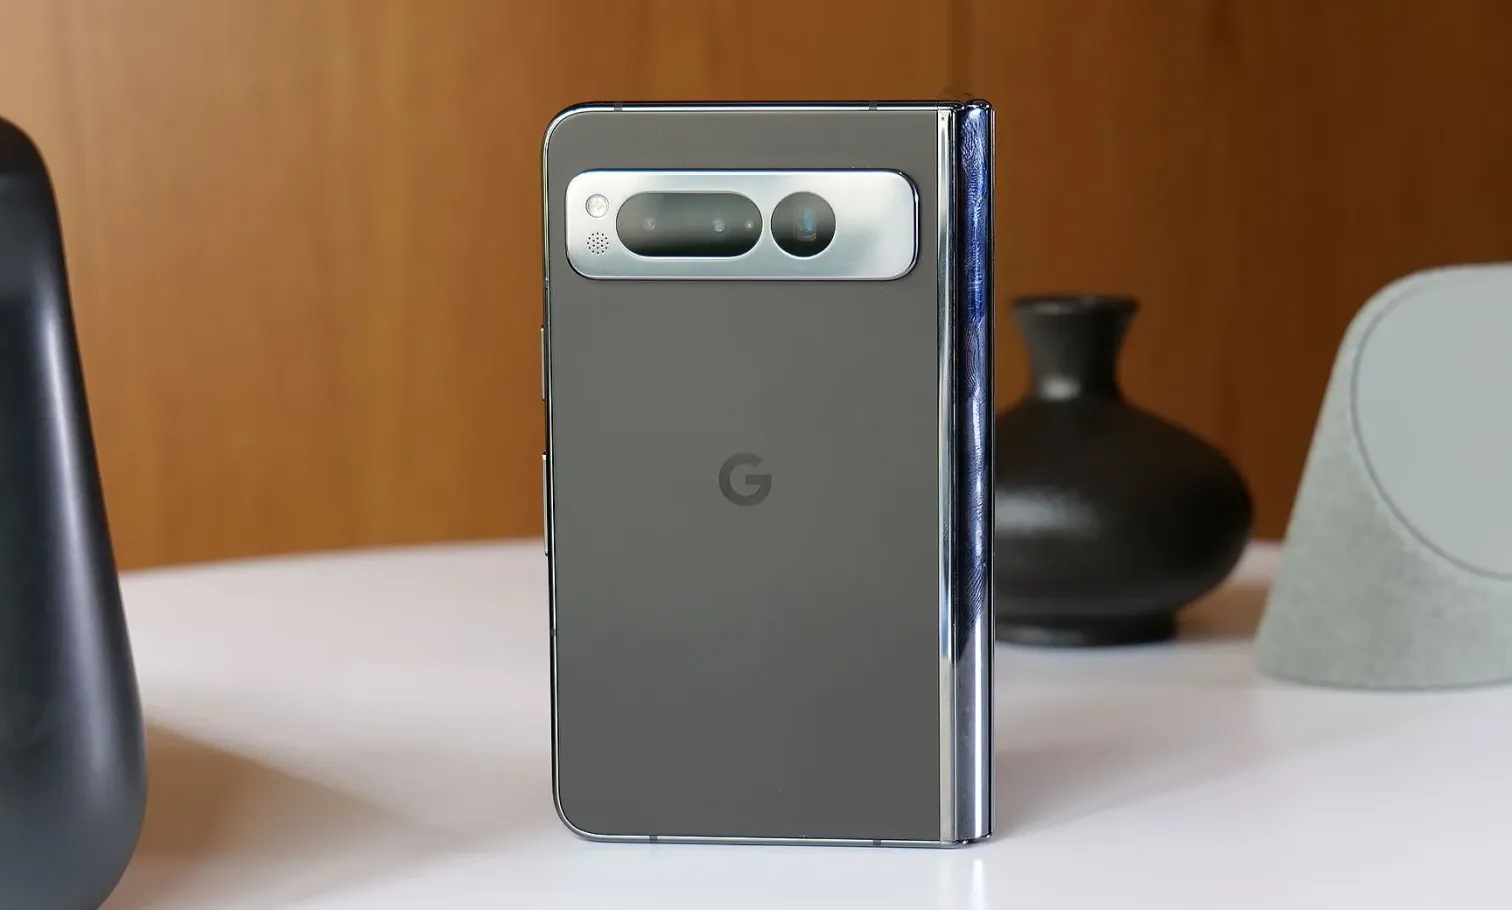 Unlike the Samsung Galaxy Z Fold 4, which has a shorter zoom than the S22 Ultra, the Pixel Fold has the same camera system, including 5x optical zoom, just like the Pixel 7 Pro. (Image credit: Photo by Sam Rutherford/Engadget)